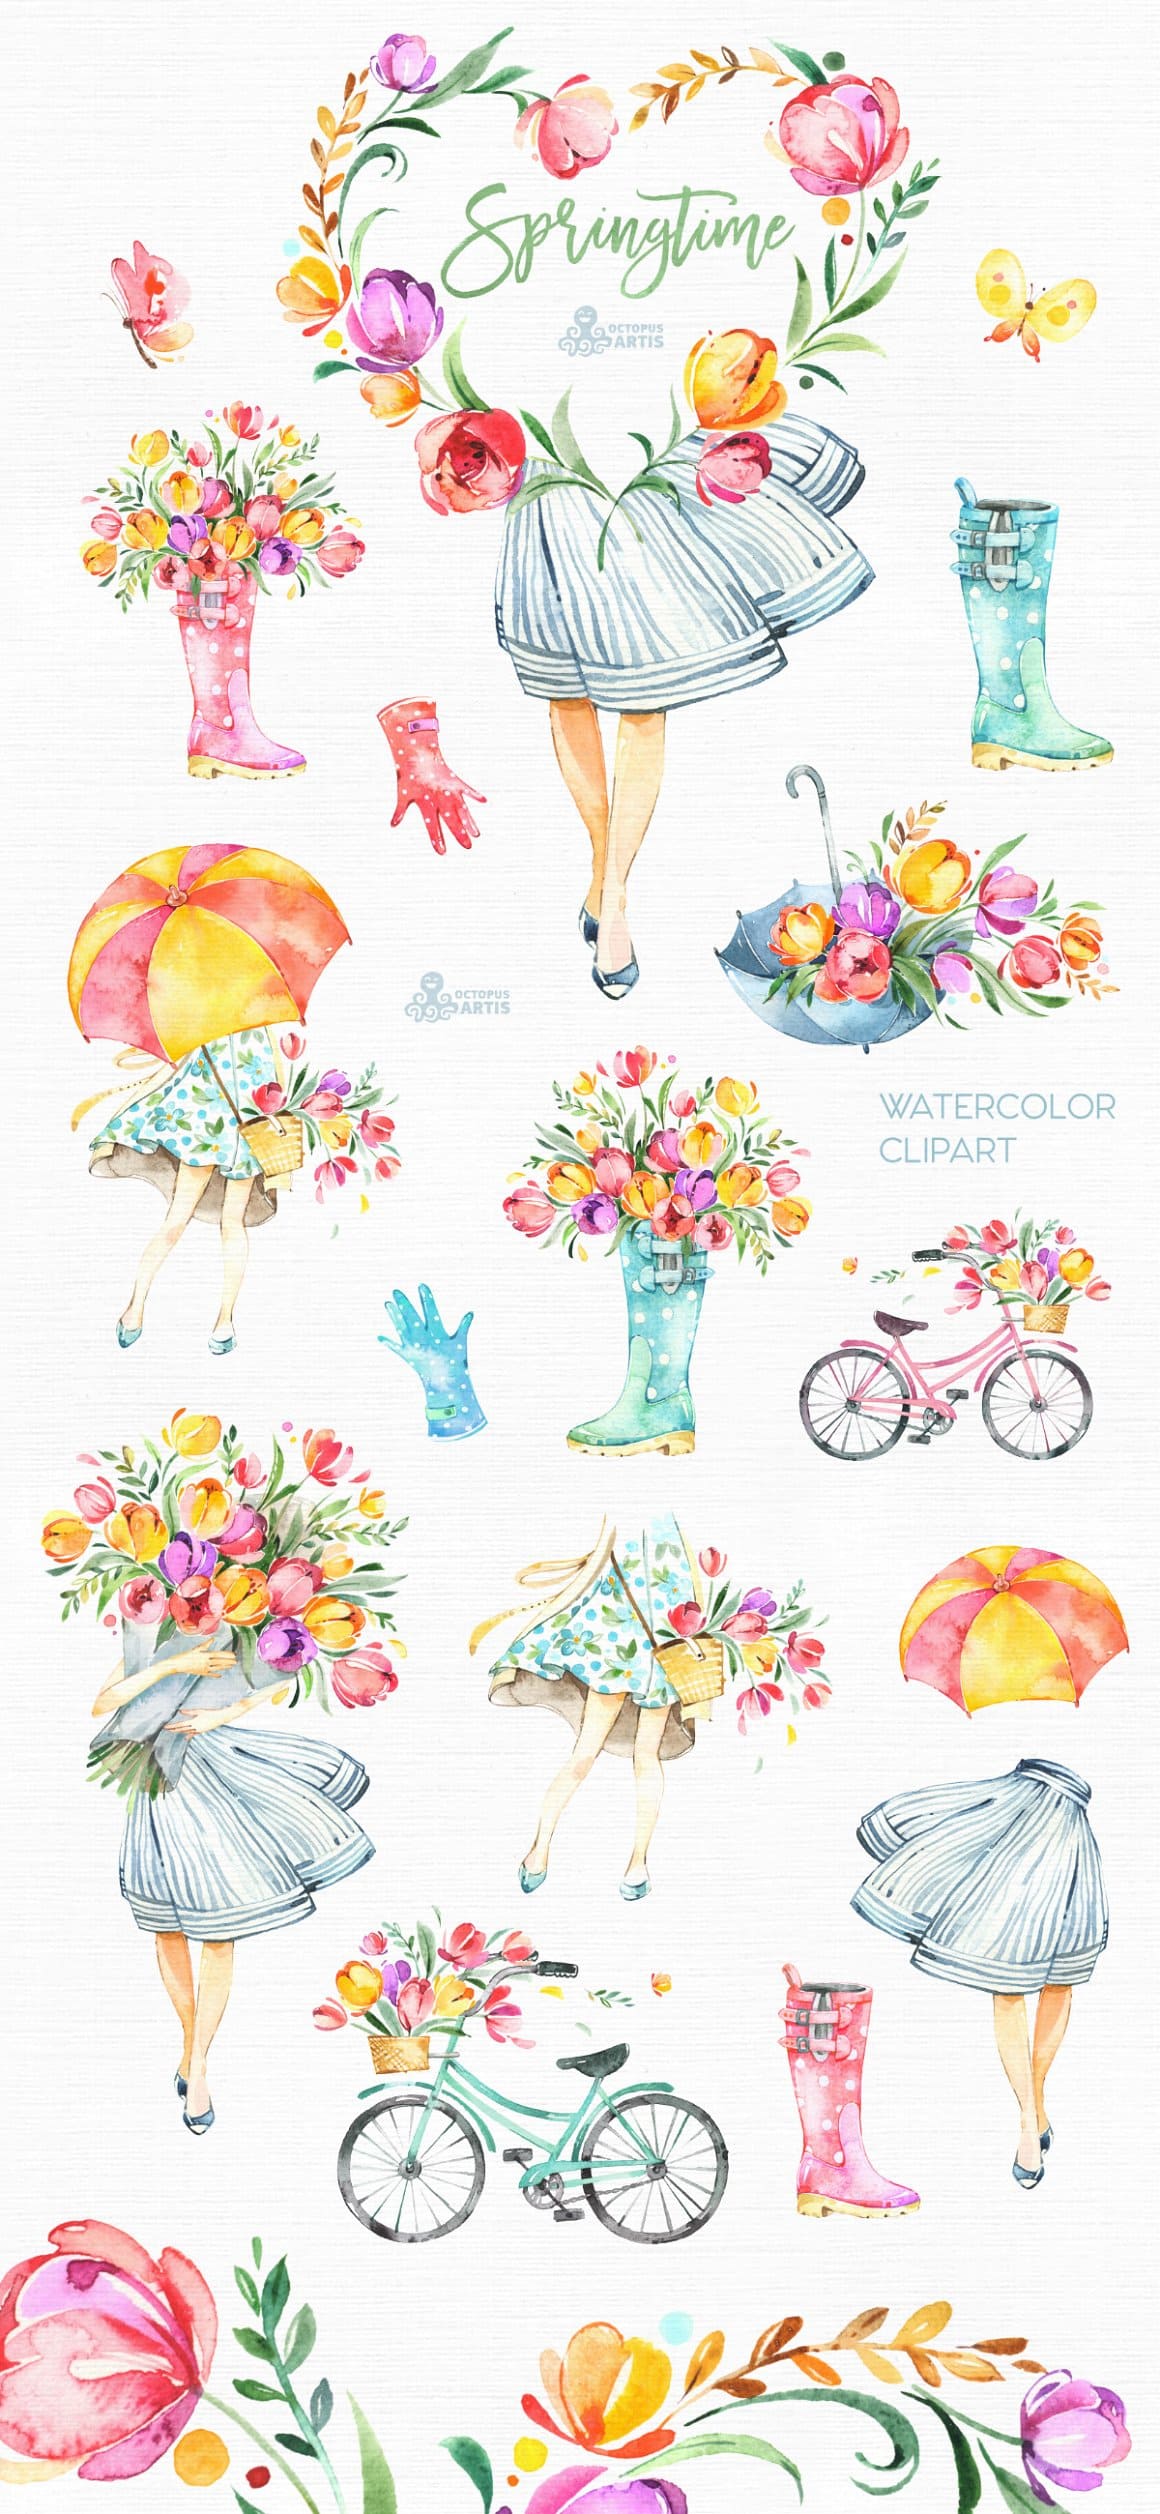 Rubber boots, bicycle, umbrellas are decorated with spring flowers.